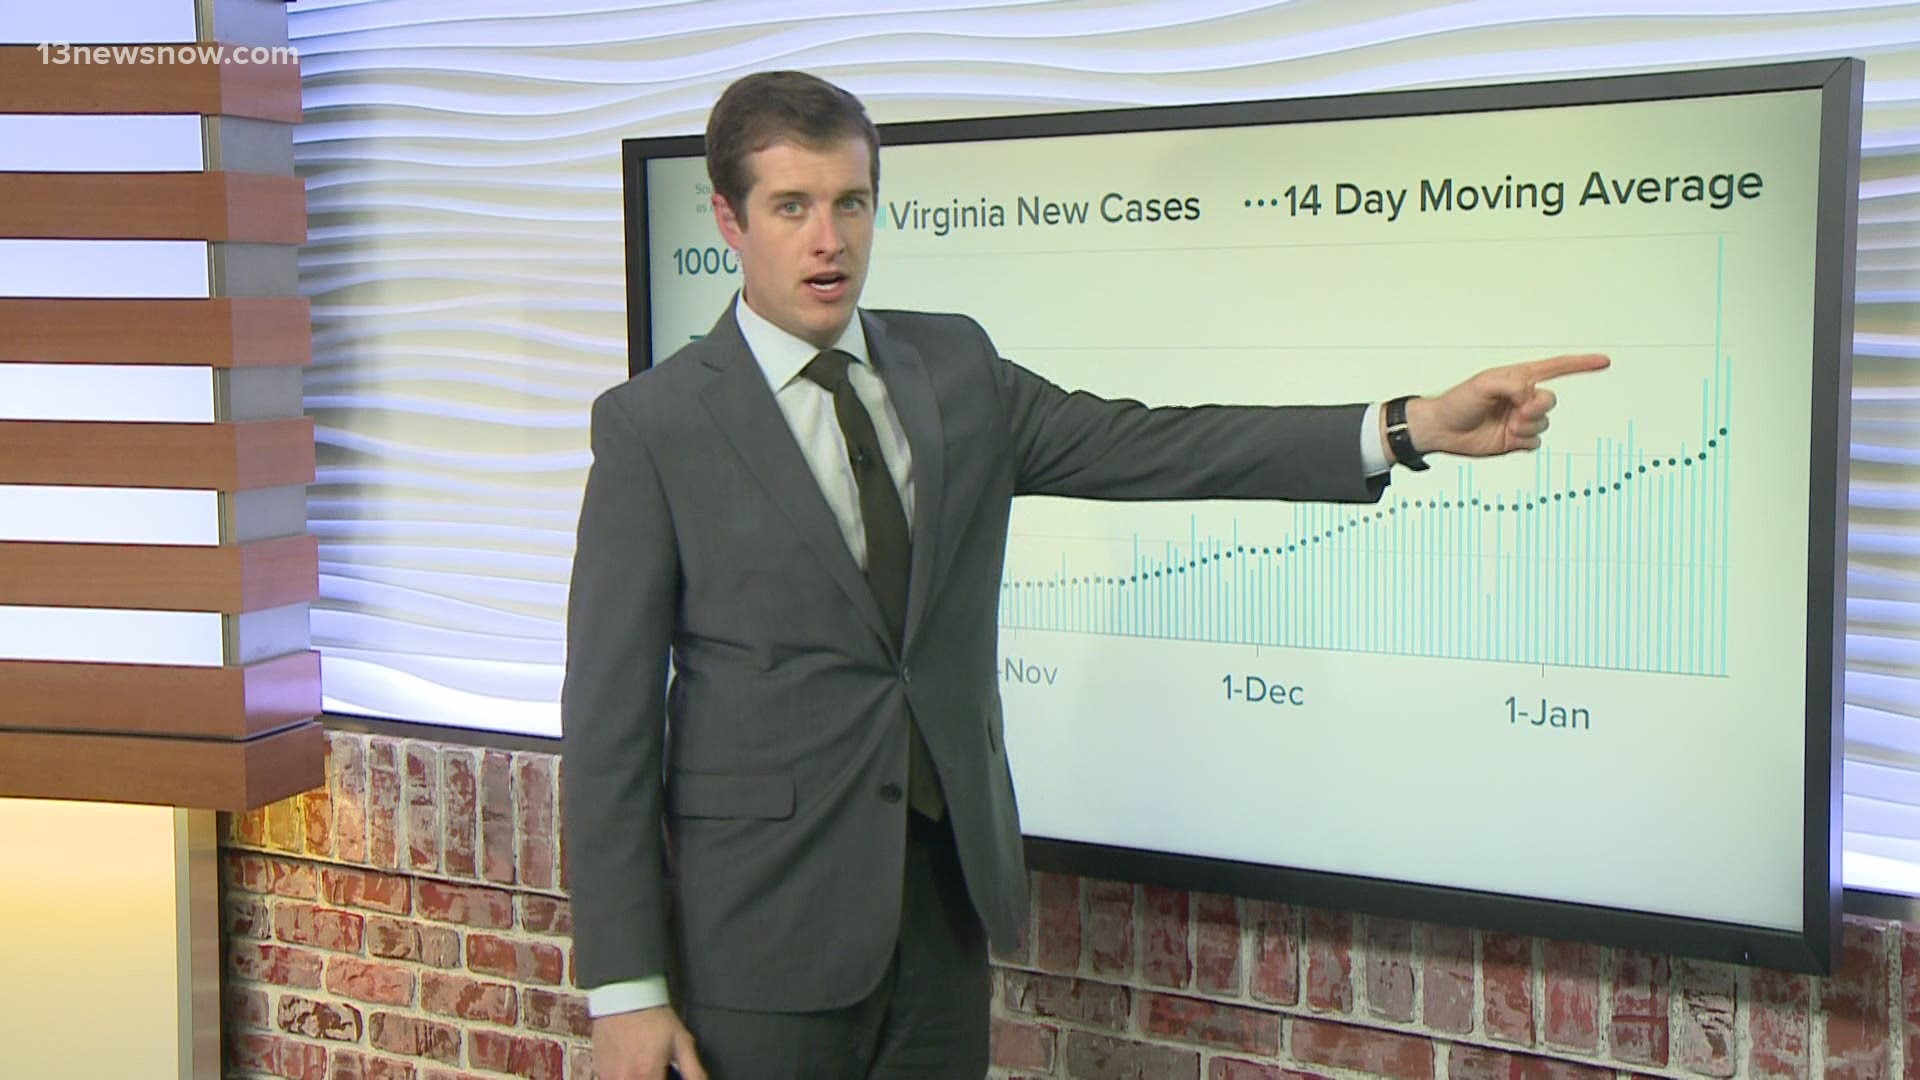 Virginia had a record-breaking weekend for COVID-19 cases. 13News Now anchor Dan Kennedy looks at VDH data to break down trends for the Seven Cities.